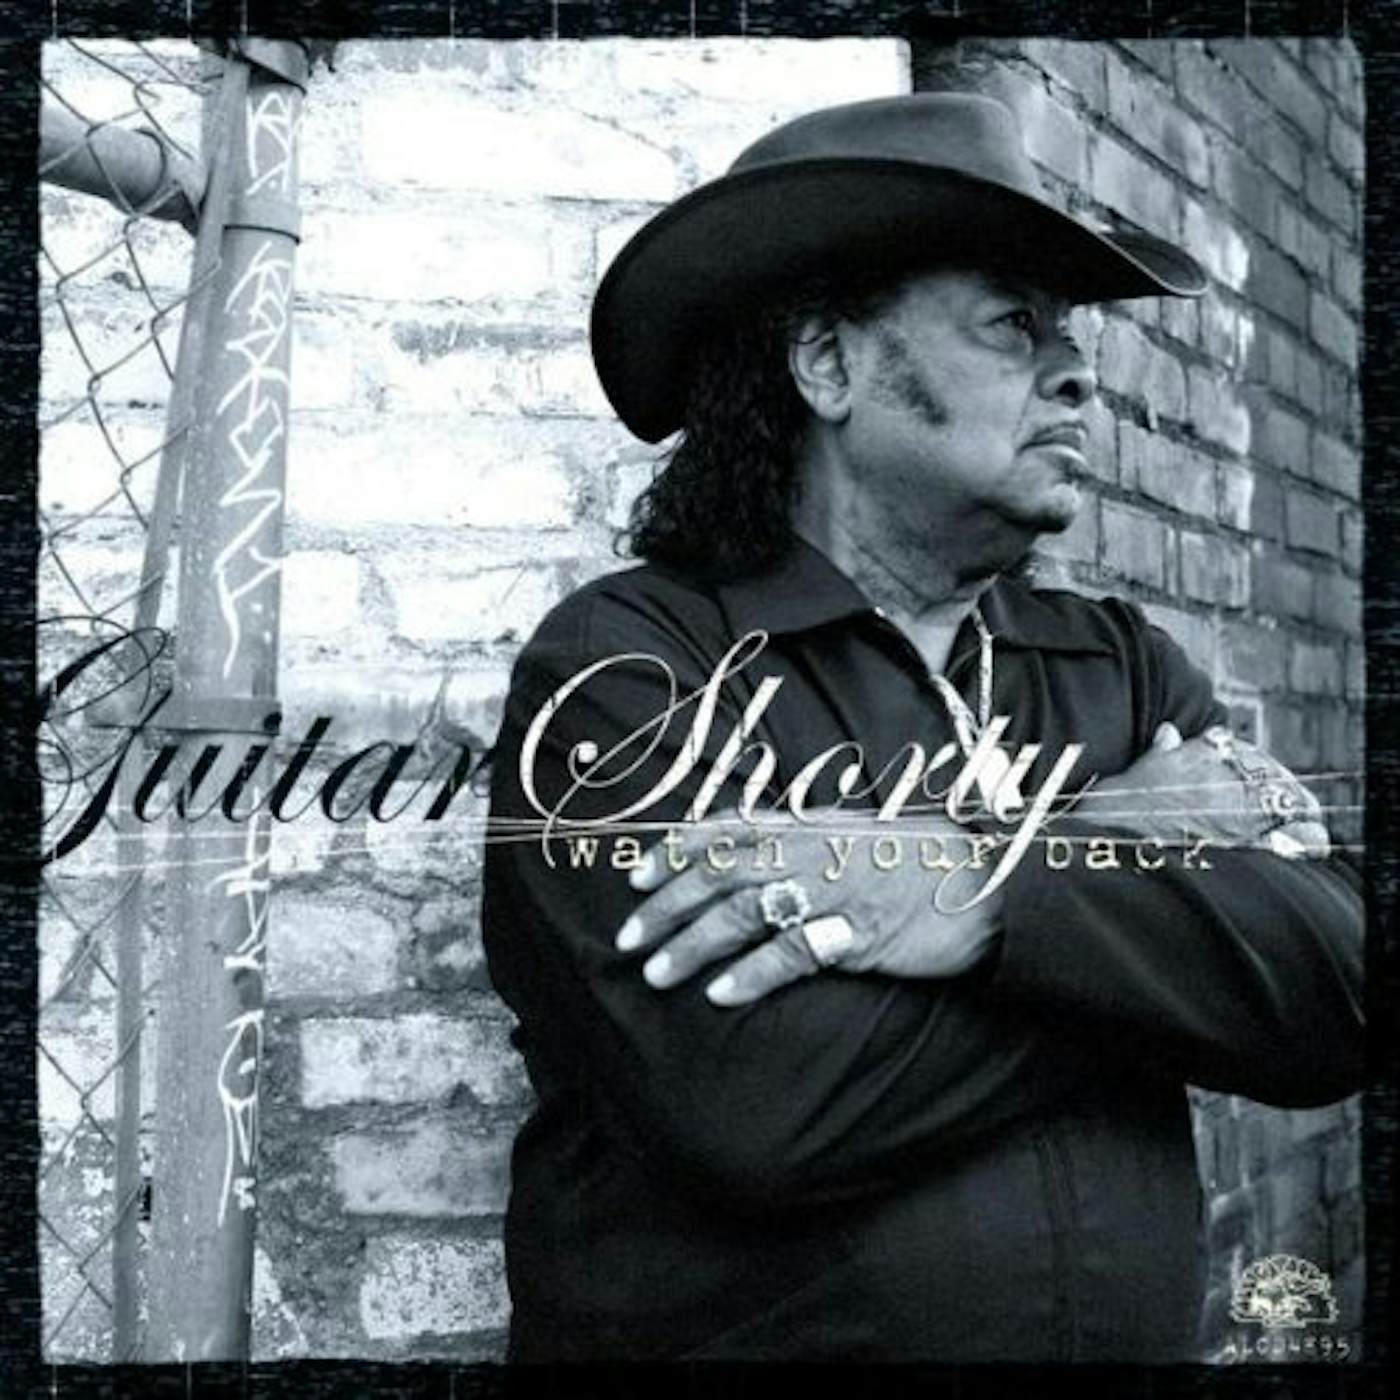 Guitar Shorty WATCH YOUR BACK CD